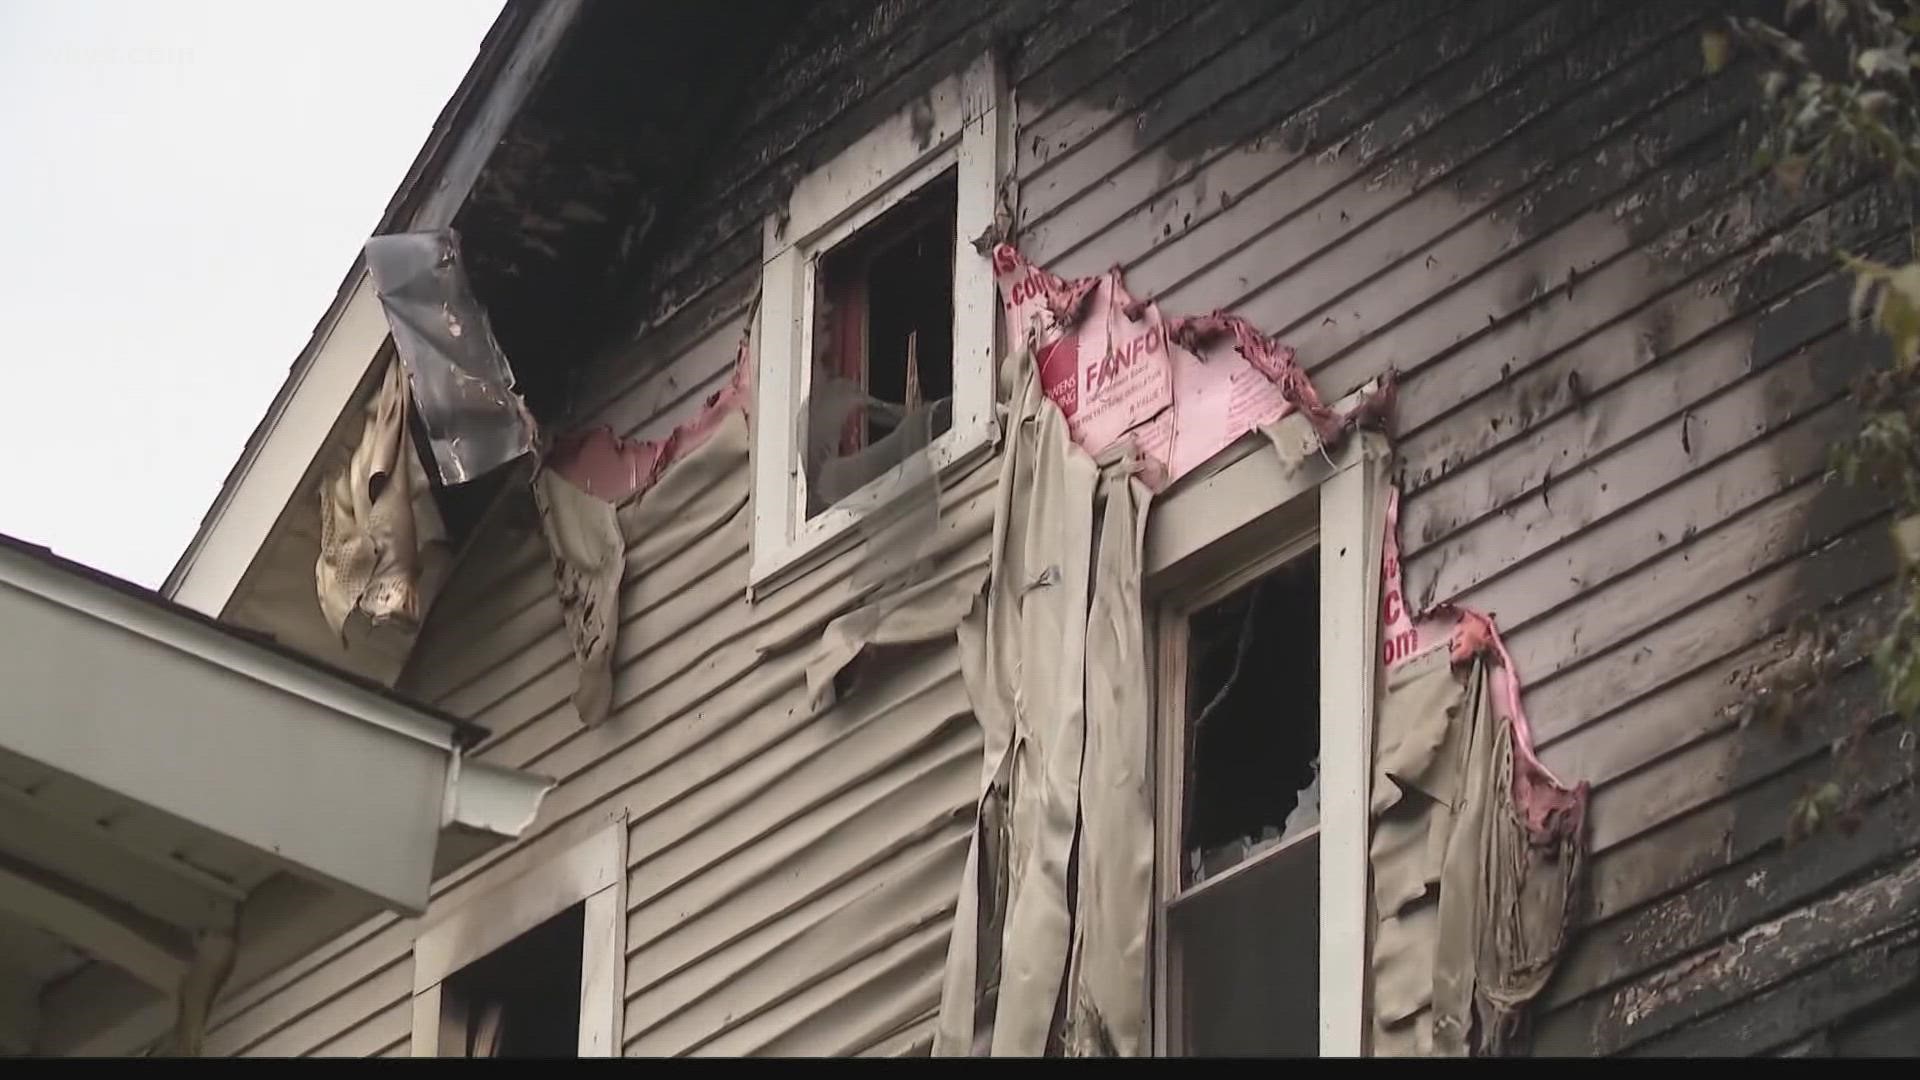 The city of Akron has confirmed 20 fires in November, alone. Mark Naymik has the story.